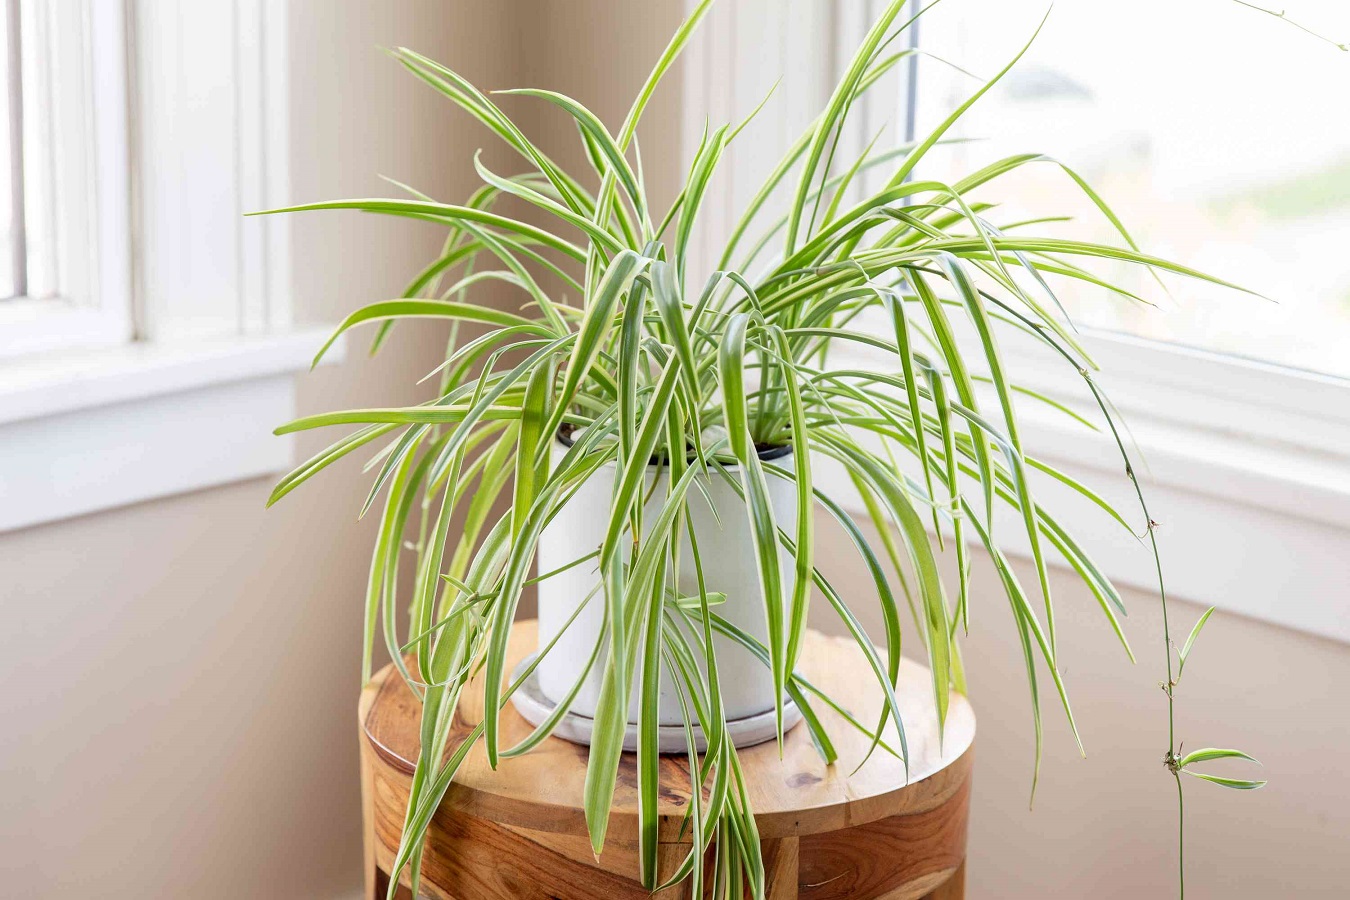 Spider Plant Care - All About Watering, Propagation, and Benefits